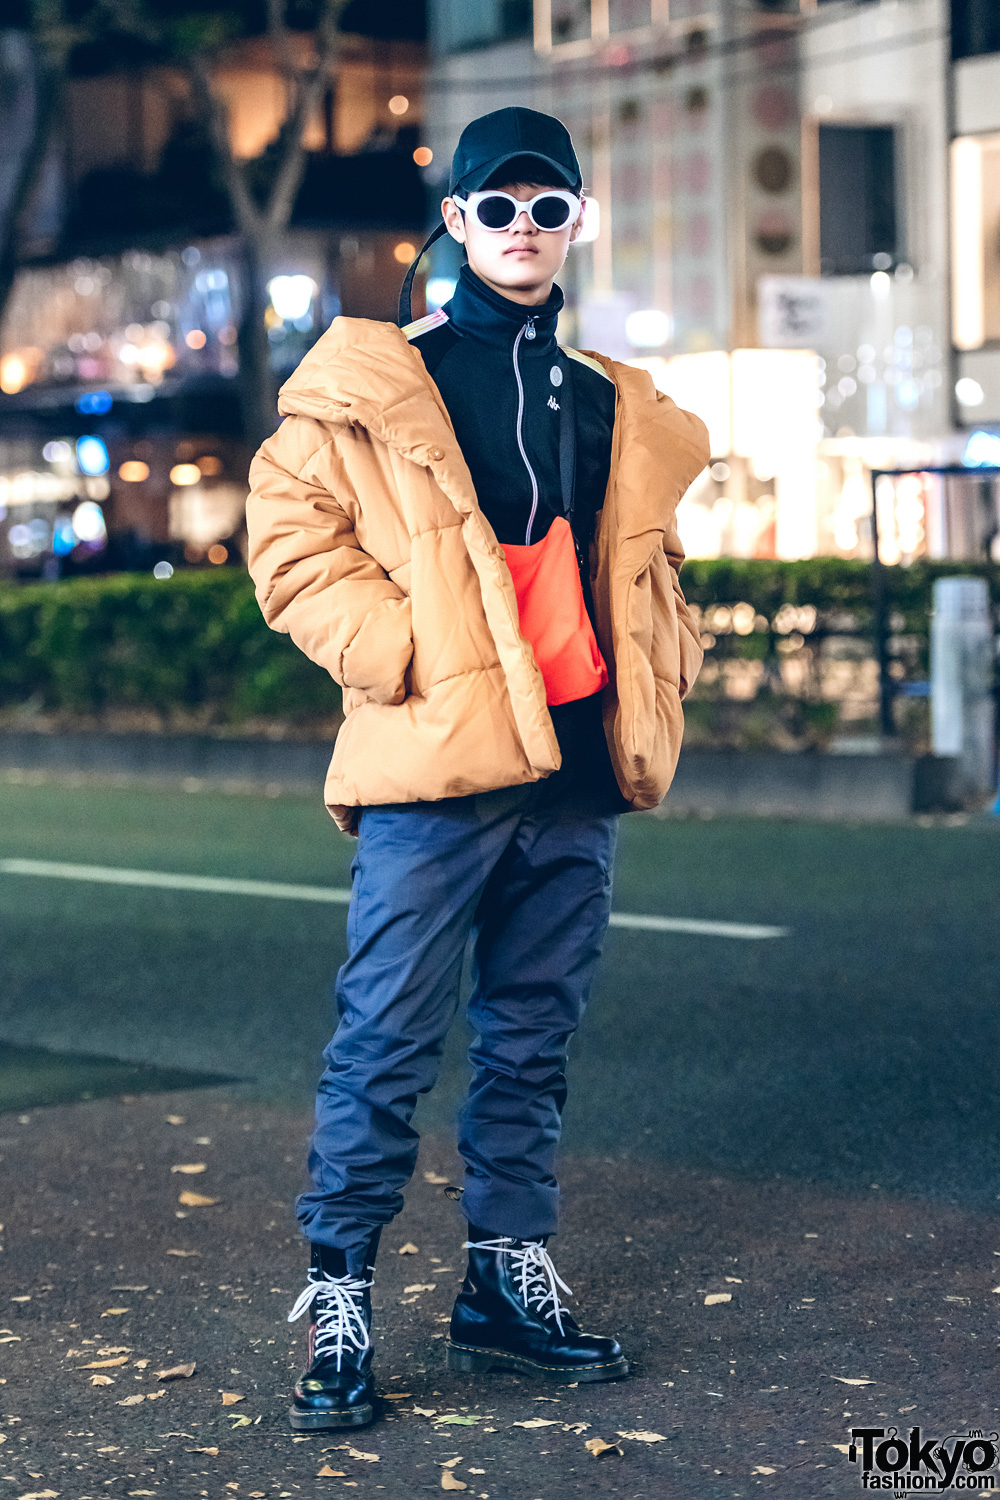 Cold-Weather Harajuku Street Style w/ Yellow Puffy Jacket, Black Zip-Up Top & Black Leather Combat Boots